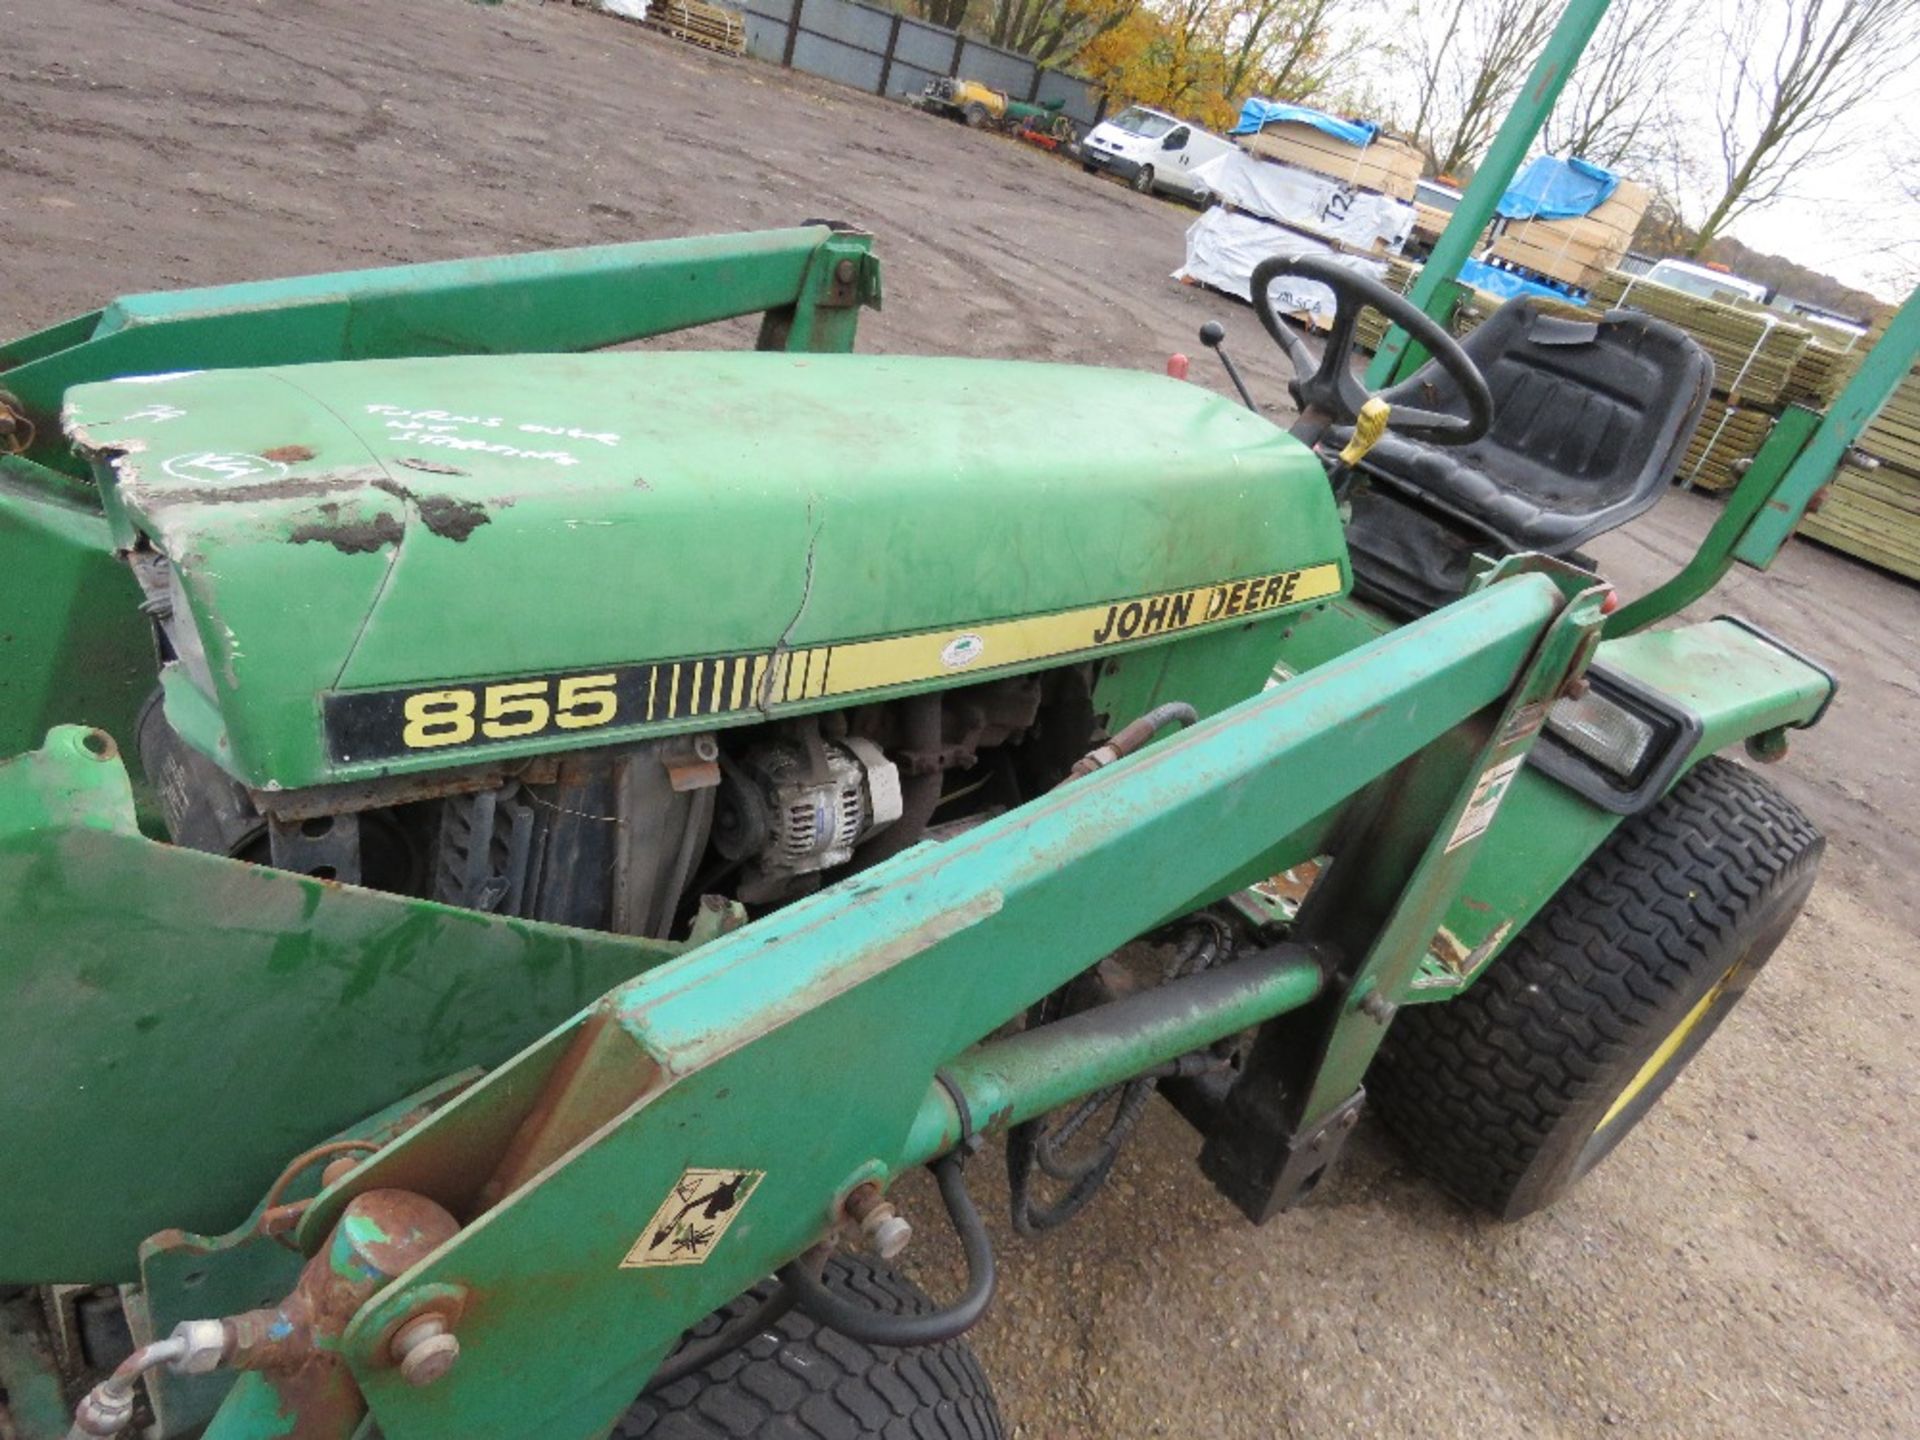 JOHN DEERE 855 4WD COMPACT TRACTOR WITH FOREND LOADER. WHEN TESTED WAS SEEN TO TURN OVER BUT NOT STA - Image 6 of 8